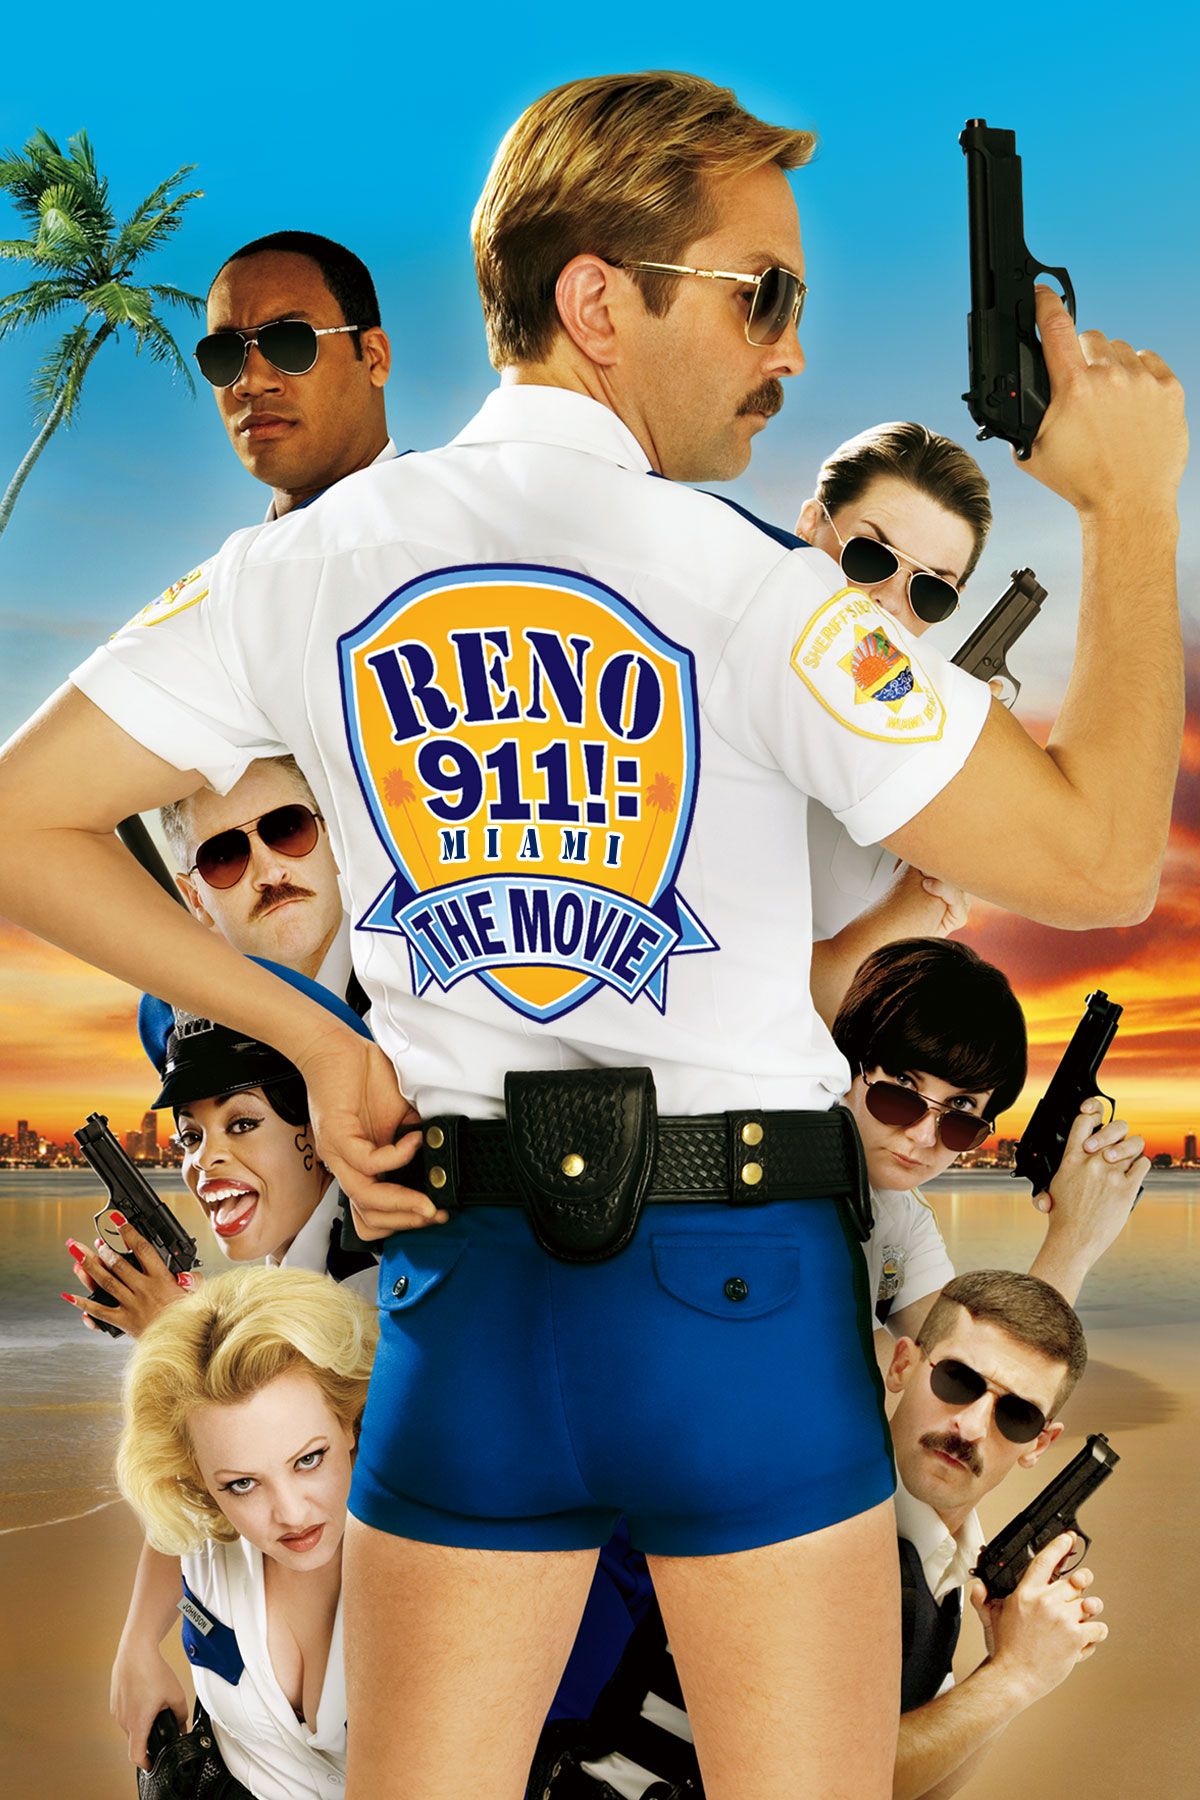 Reno 911!: Miami (Unrated Version) | Full Movie | Movies Anywhere